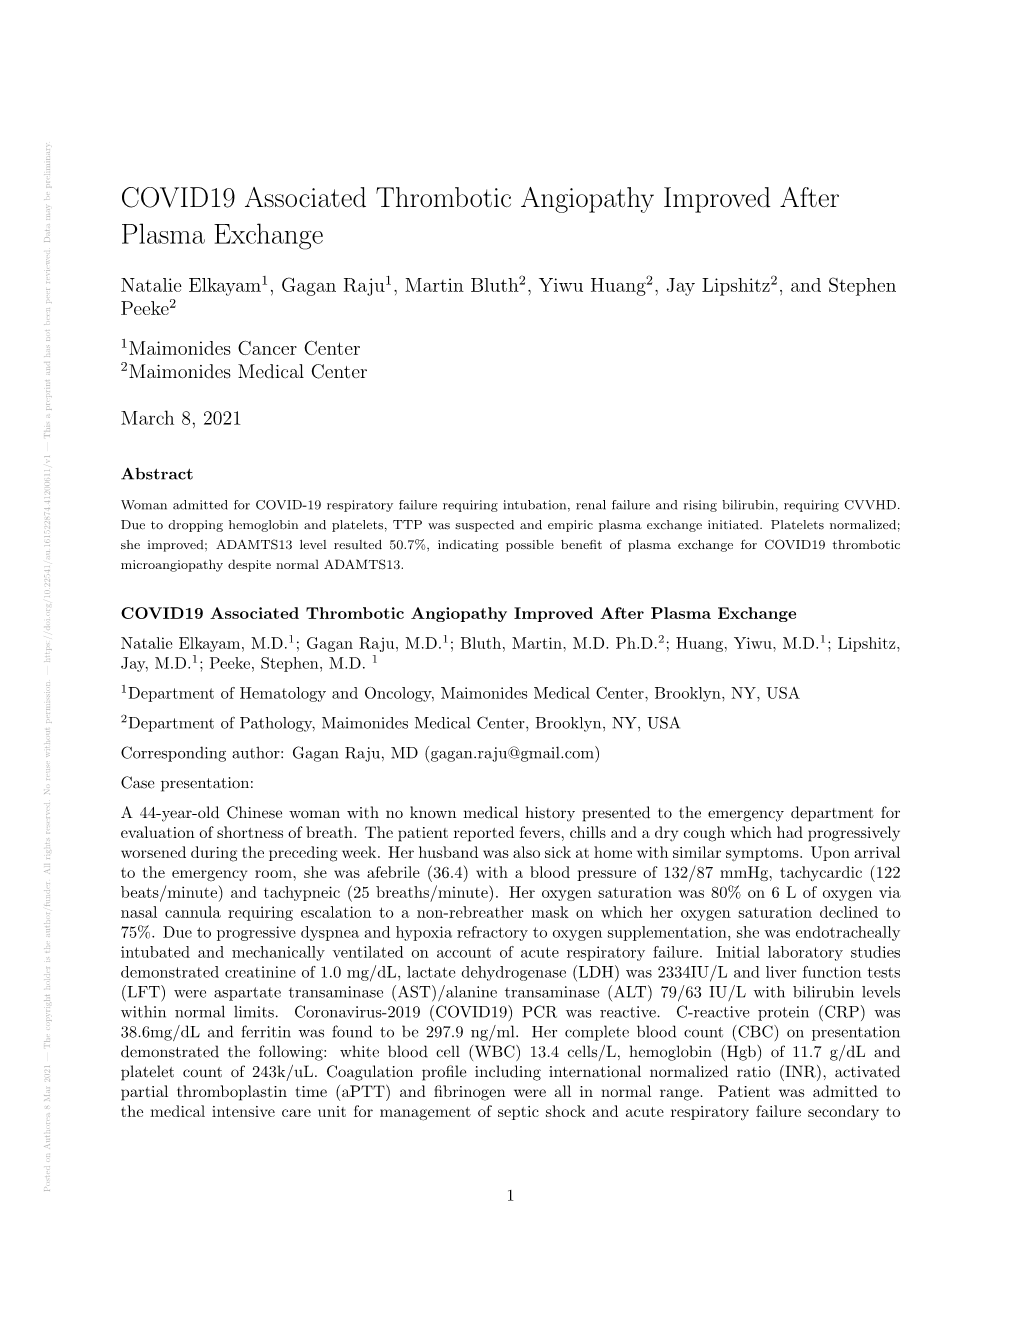 COVID19 Associated Thrombotic Angiopathy Improved After Plasma